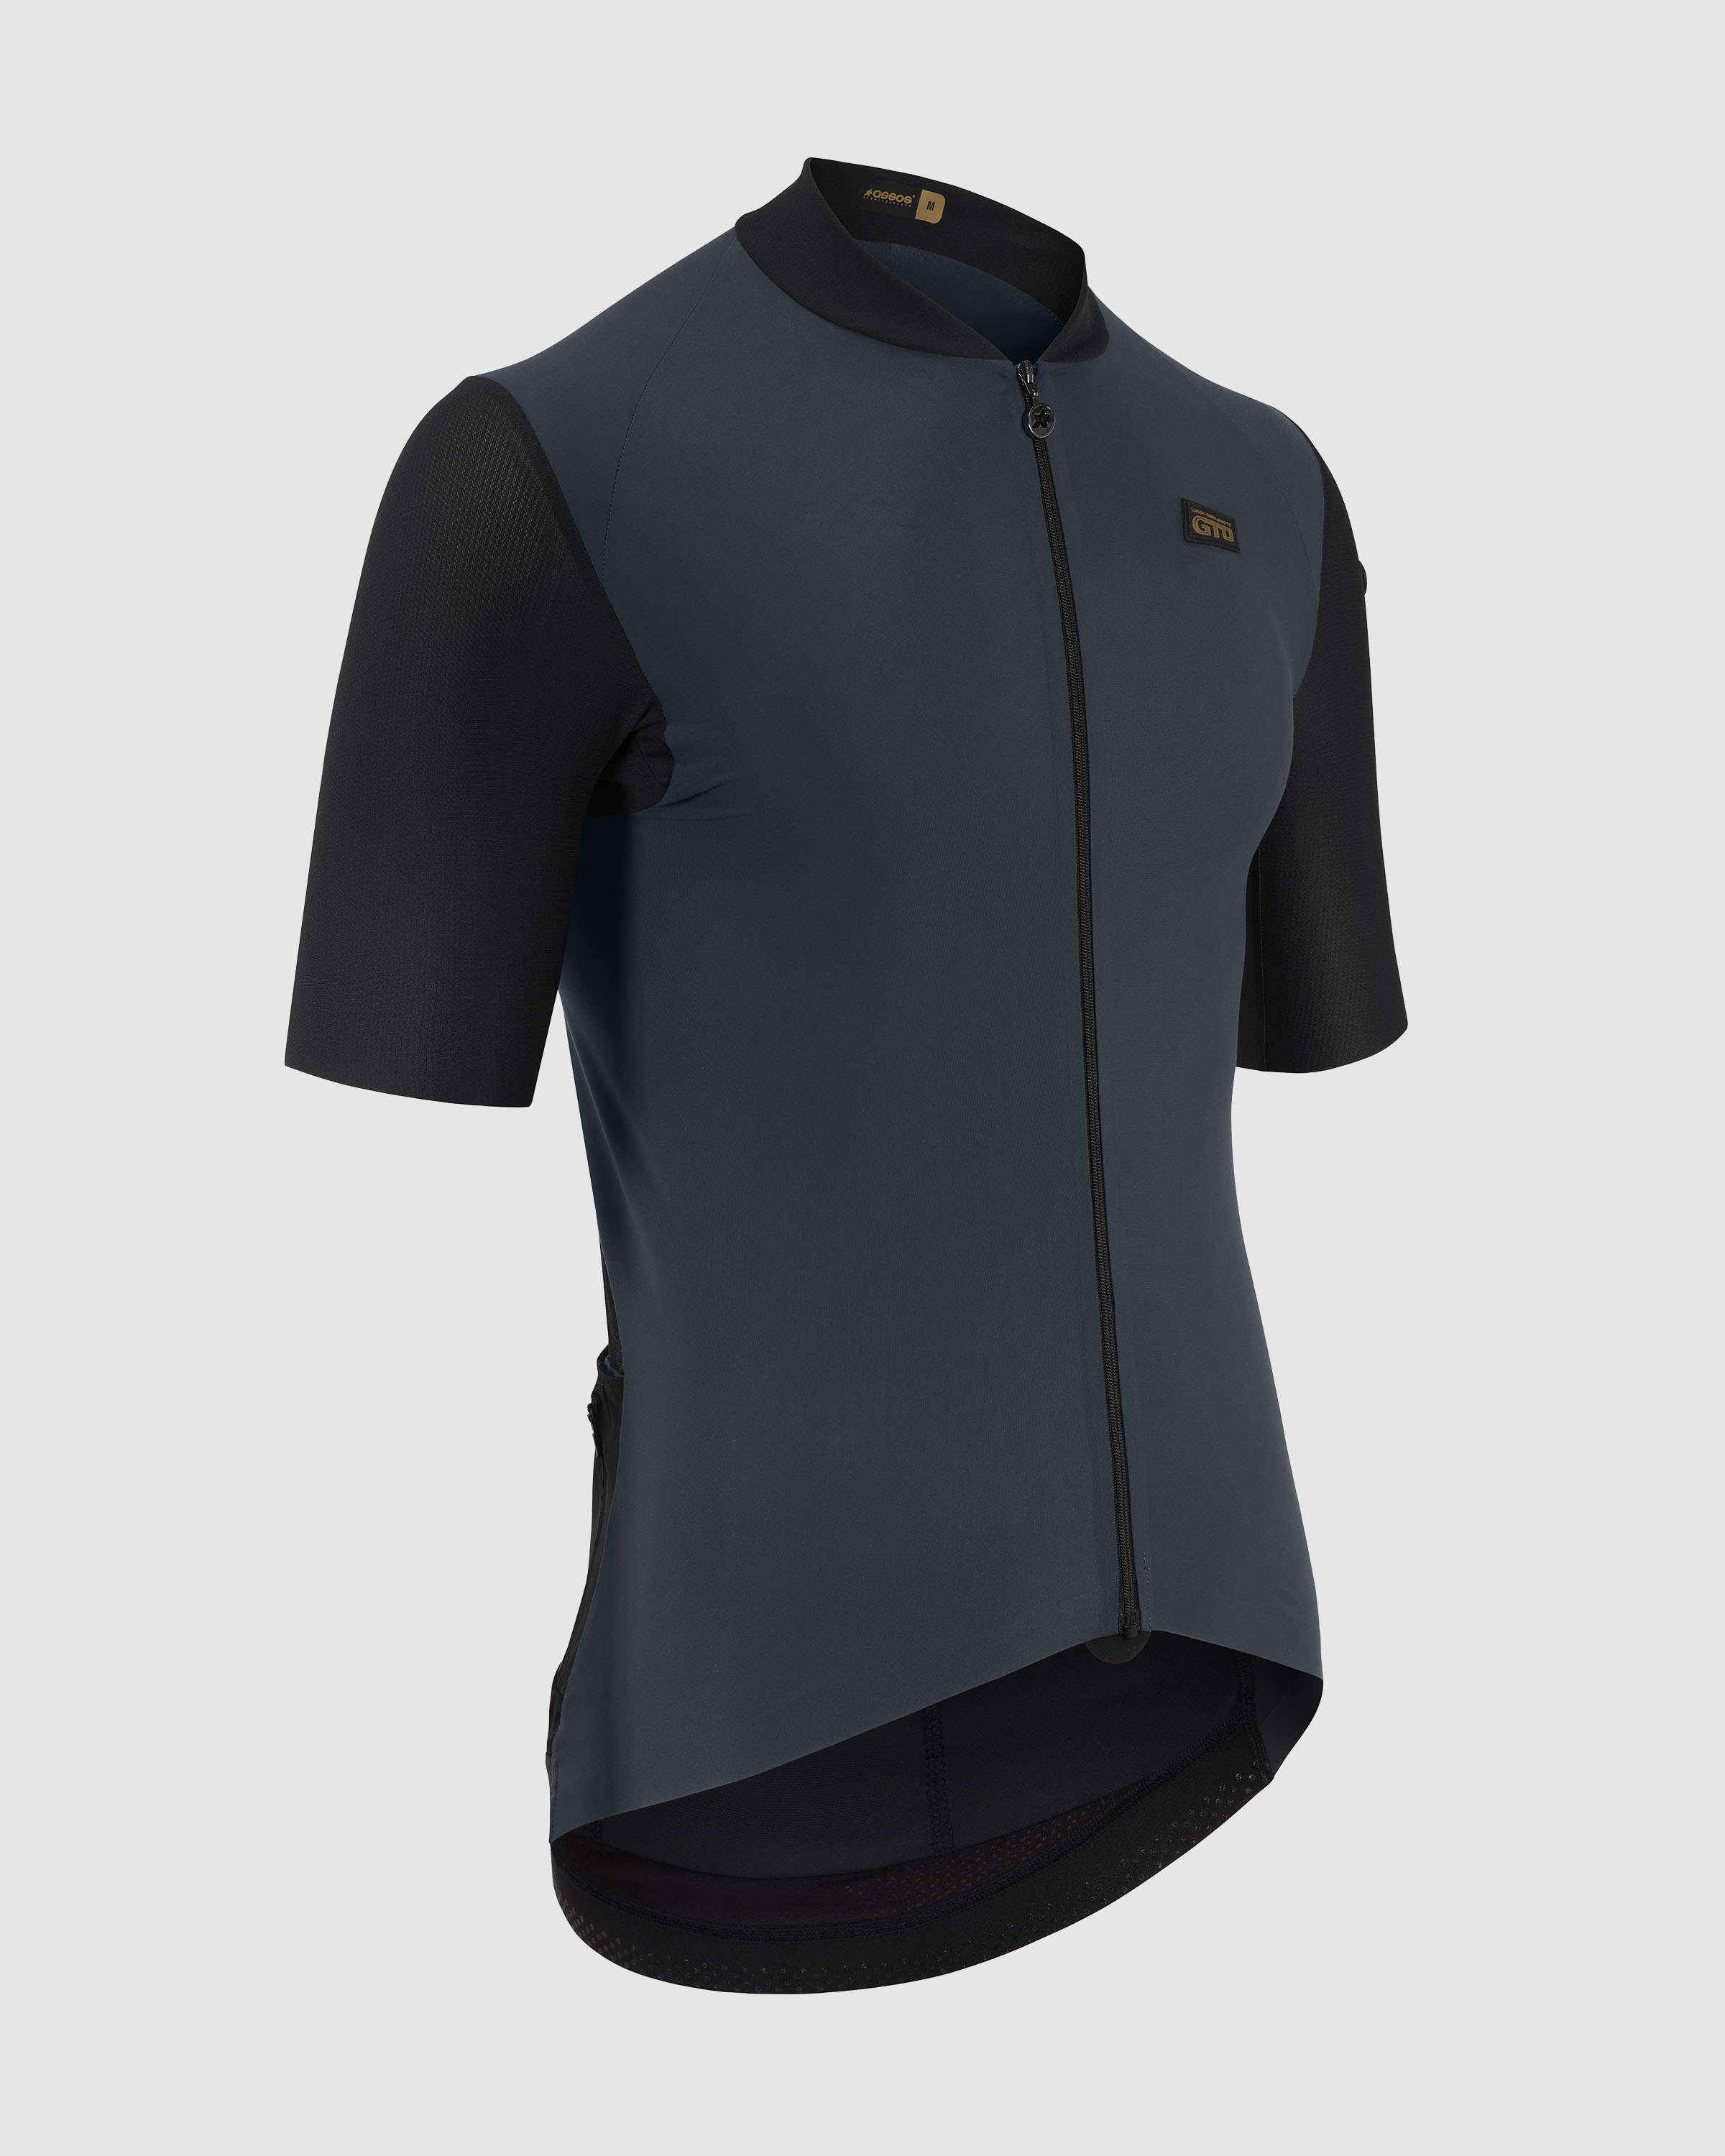 MILLE GTO Jersey C2 - ASSOS Of Switzerland - Official Outlet